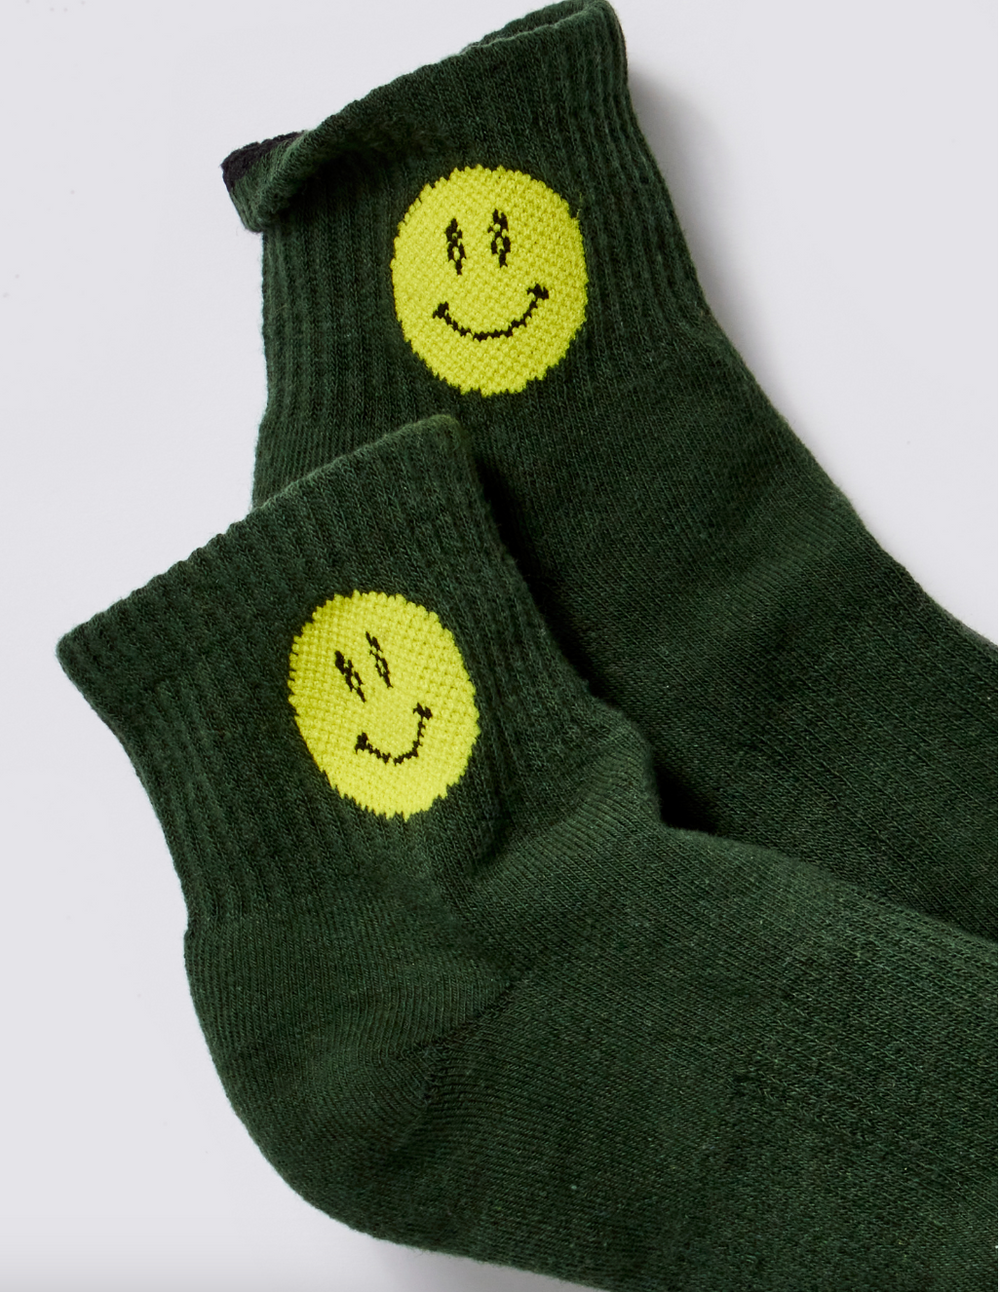 Free People Movement Smiling Butti Ankle Sneaker Socks singles